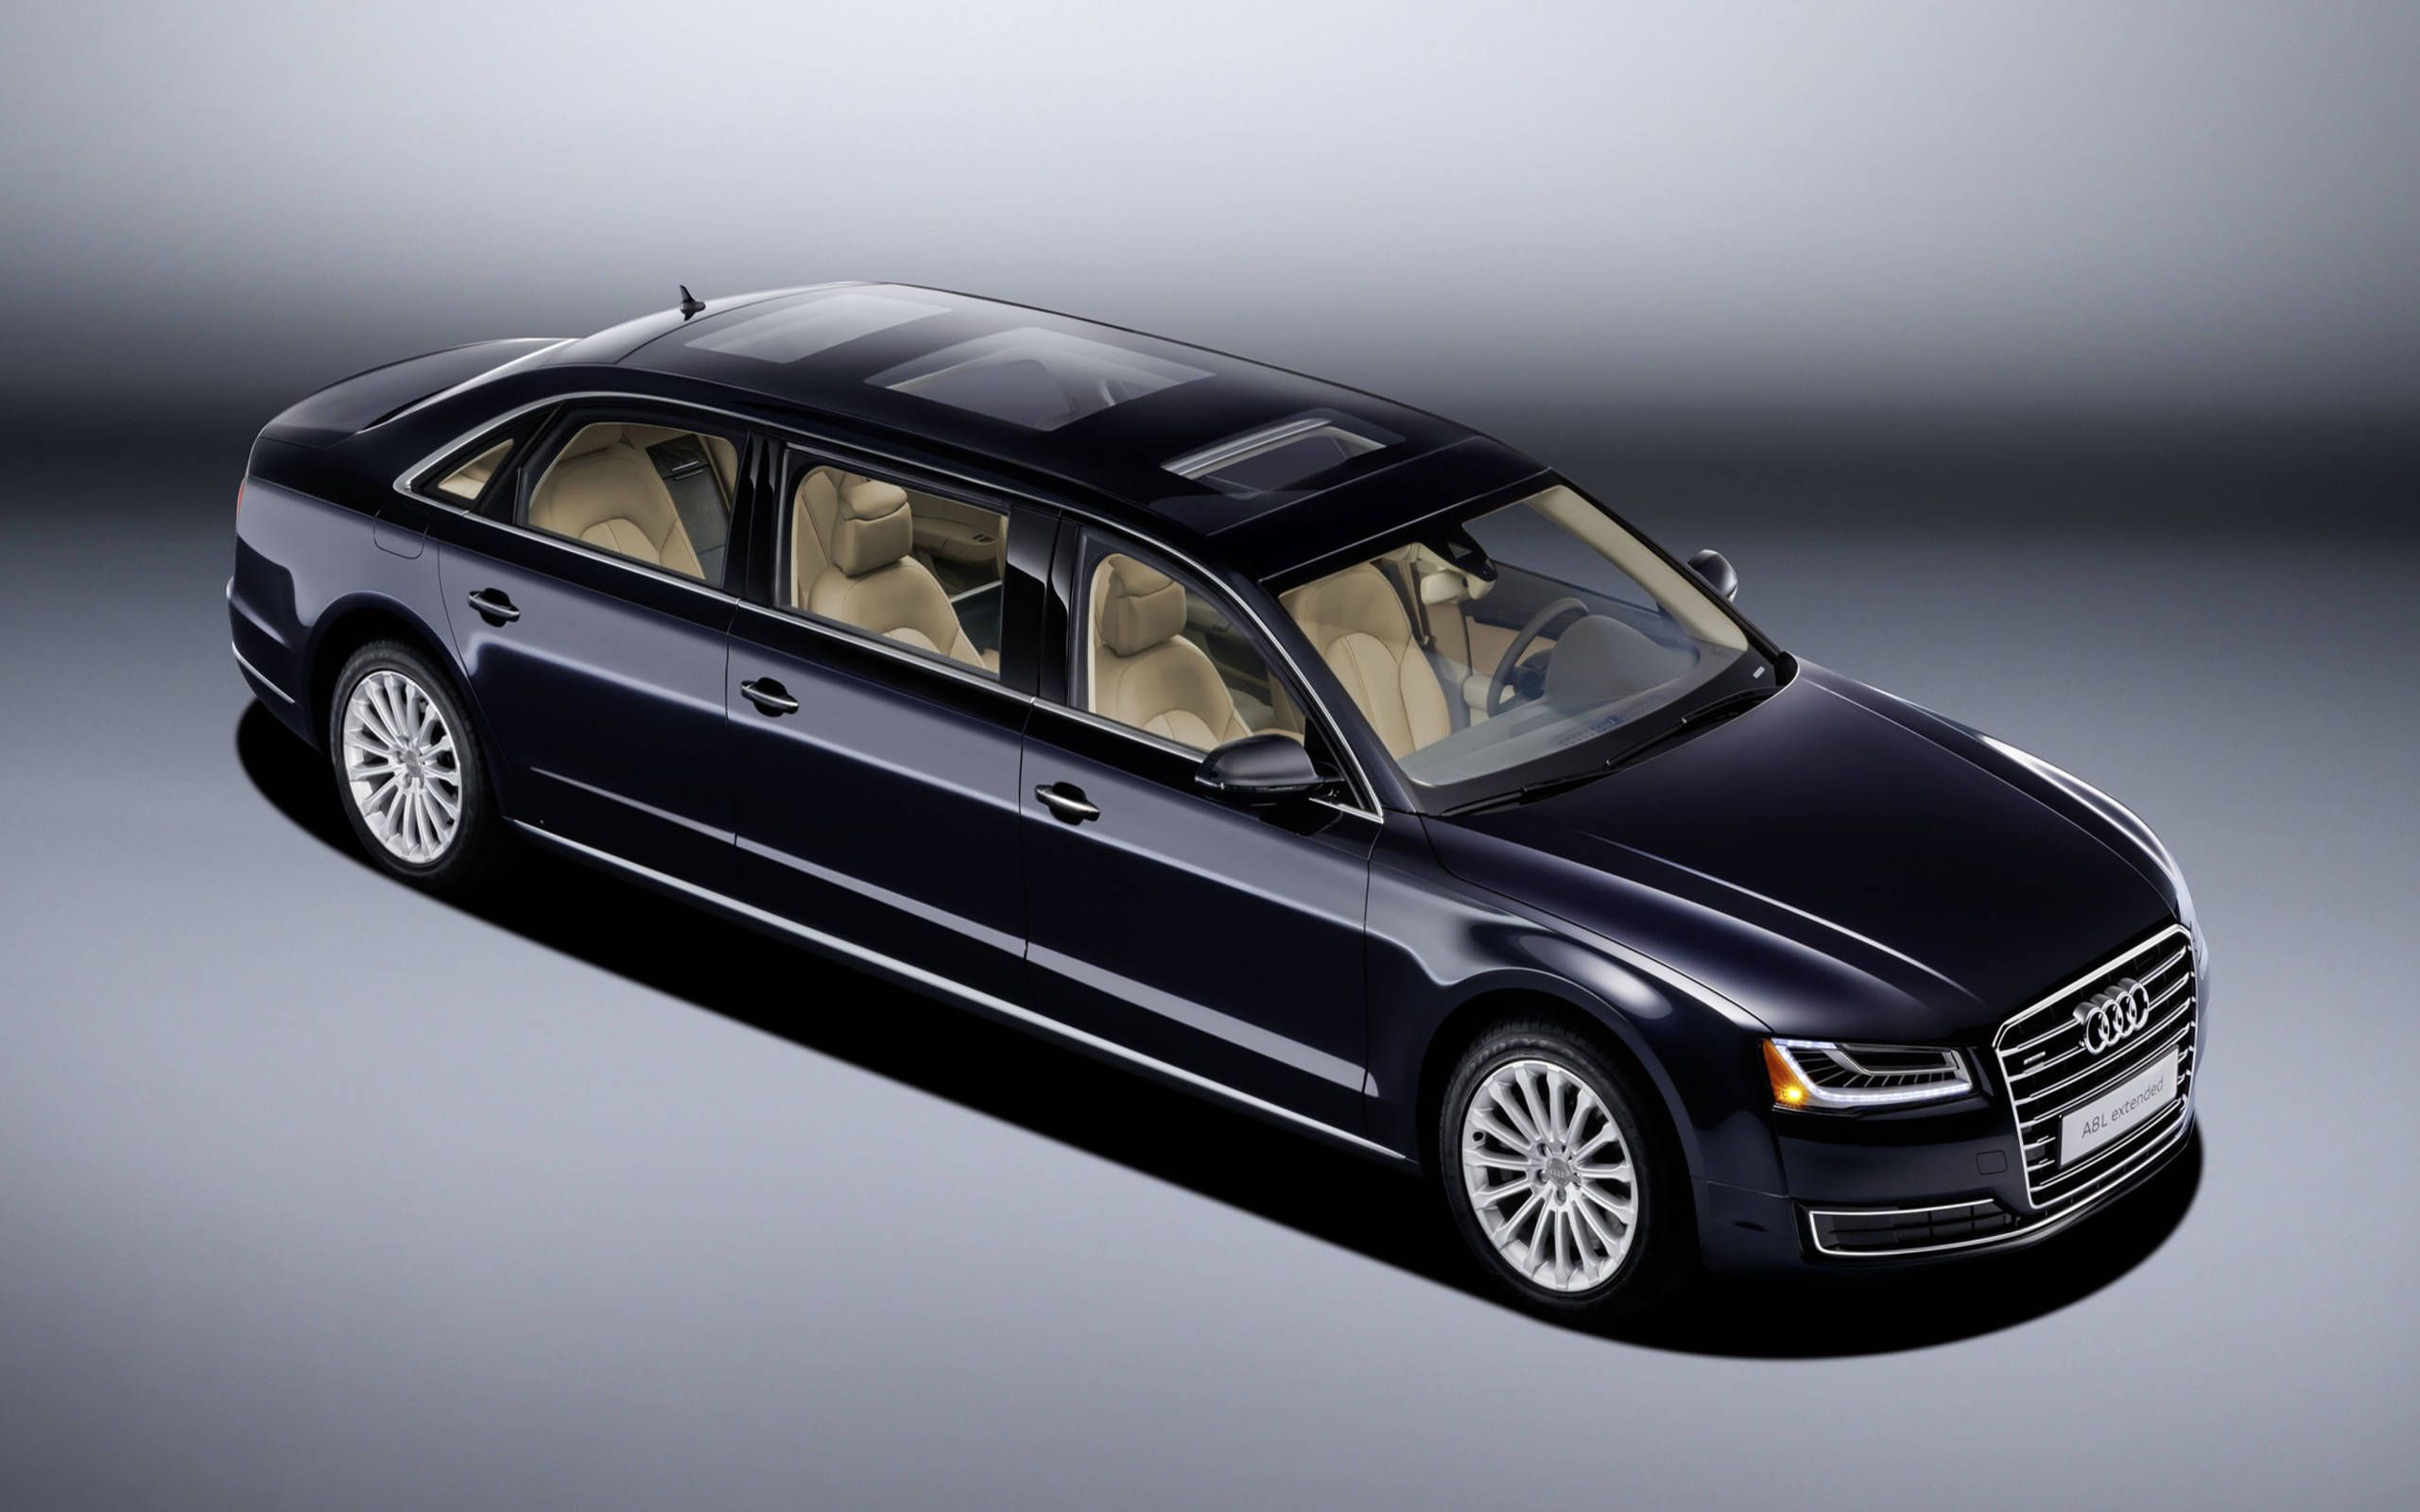 Audi spent a year building this custom A8L limo for a mystery client